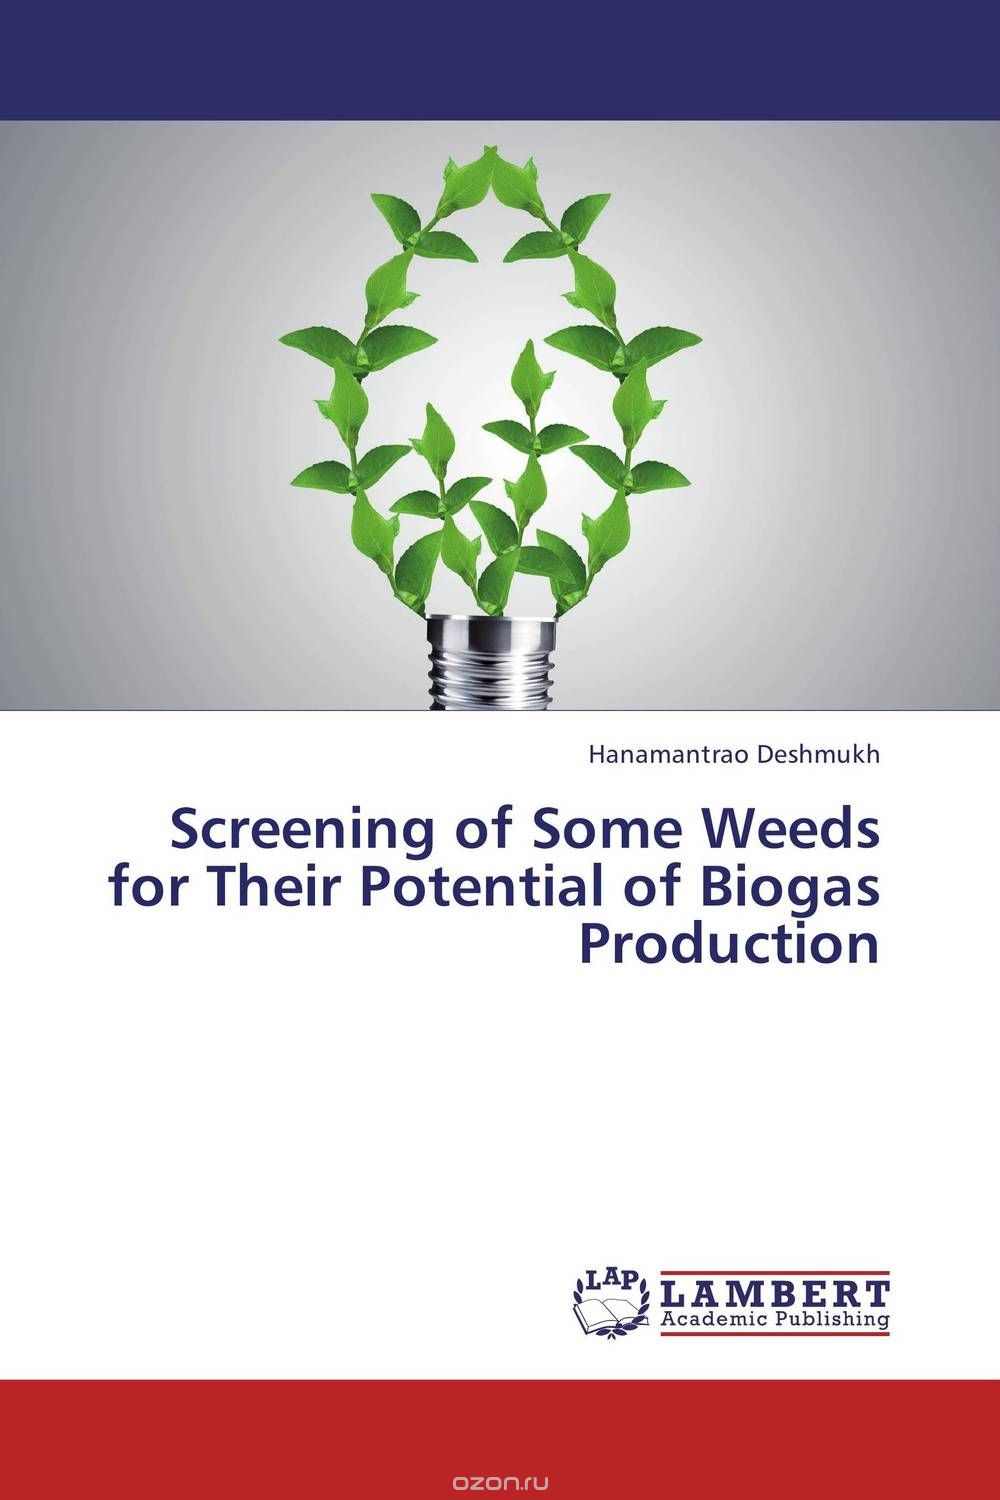 Скачать книгу "Screening of Some Weeds for Their Potential of Biogas Production"